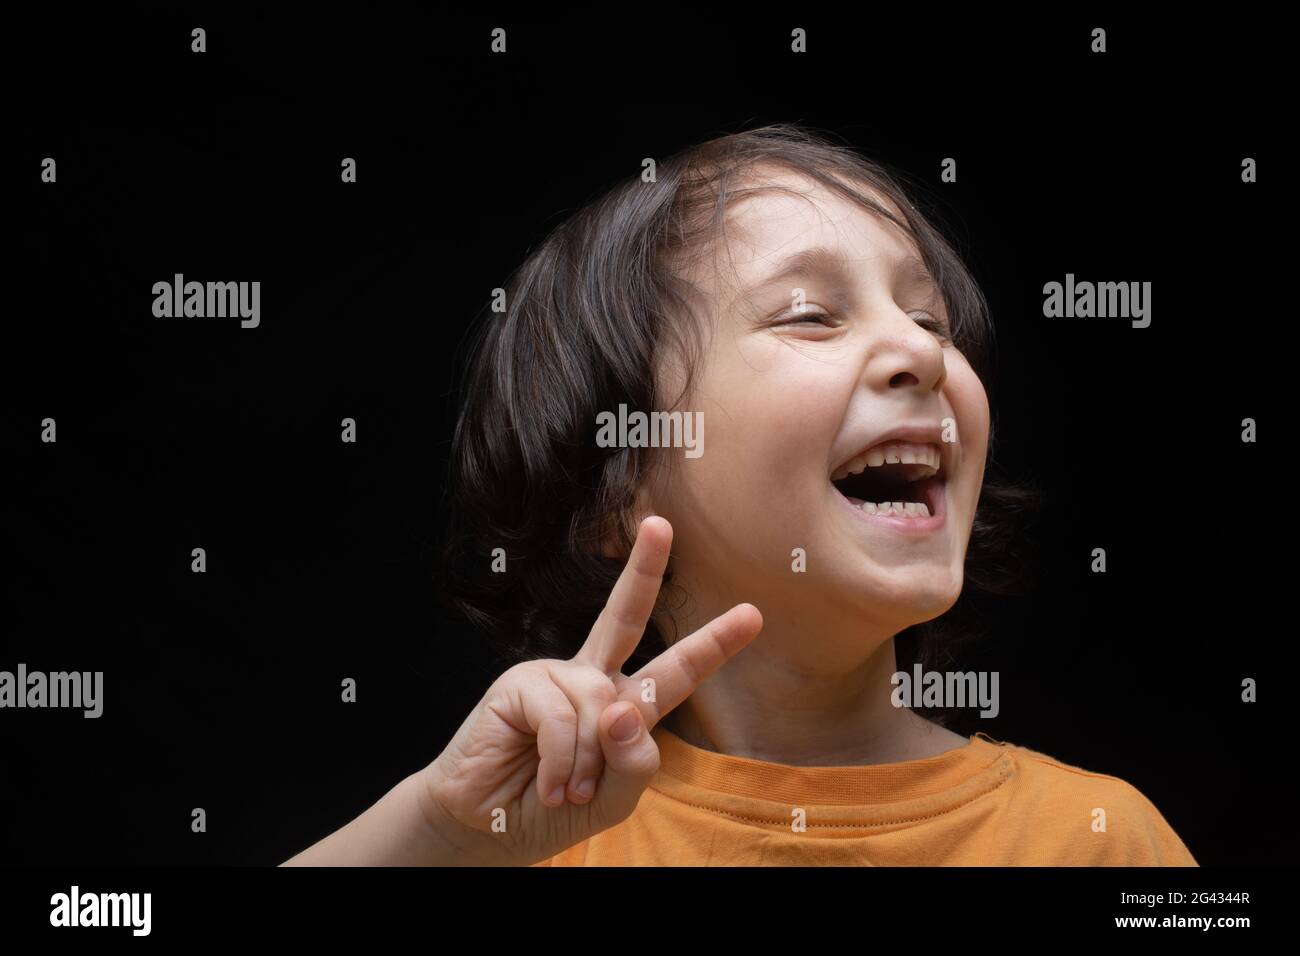 Cheerful little boy with Victory Hand Sign as Victory concept Stock Photo